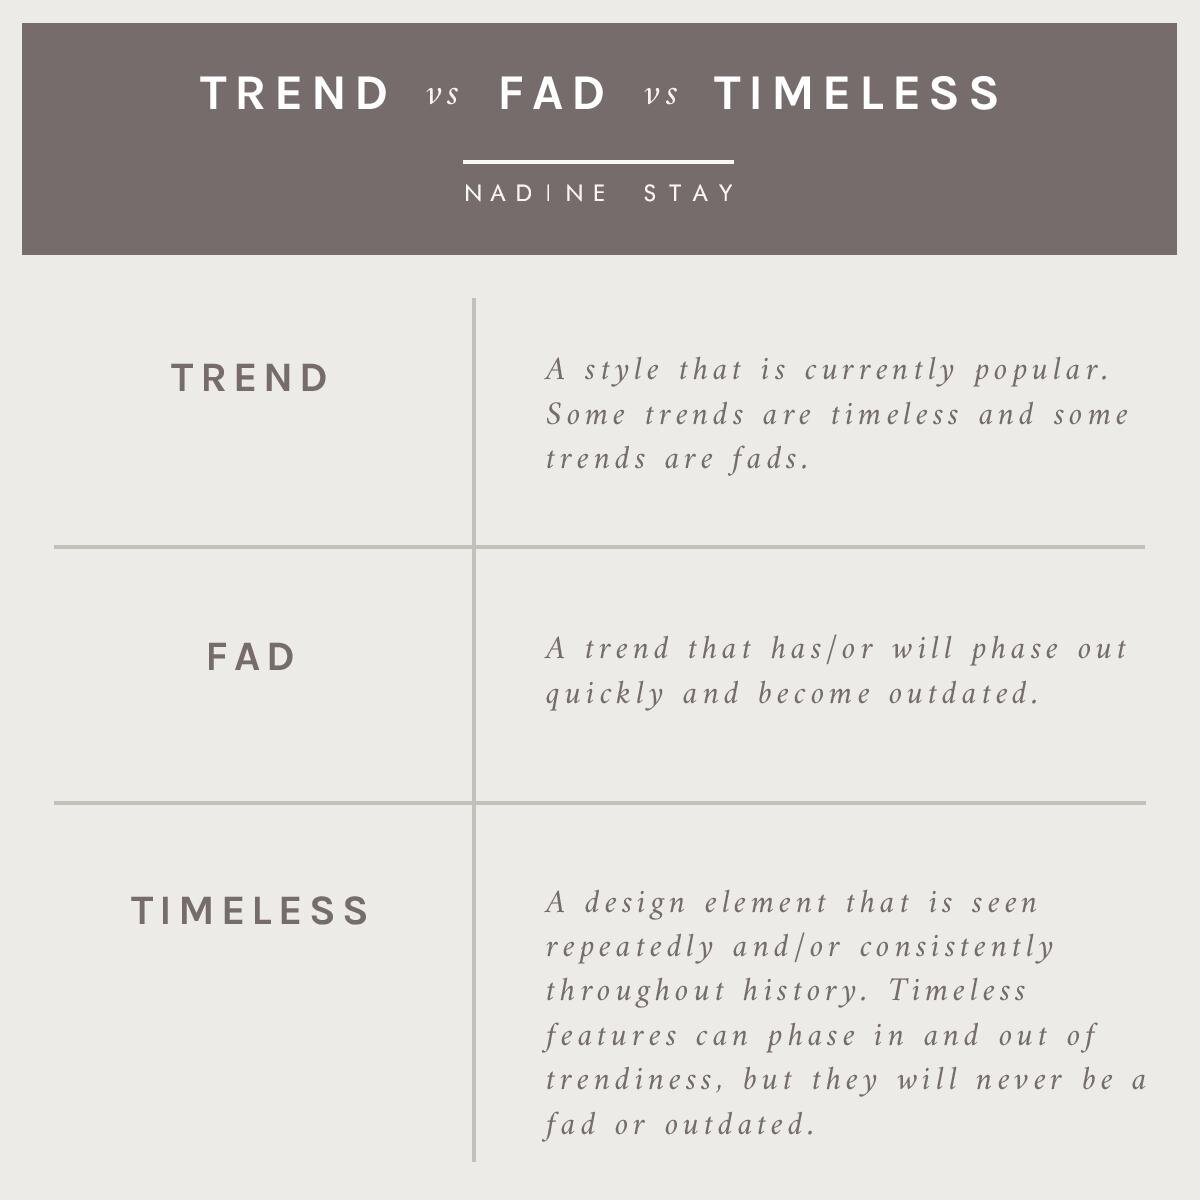 Trend vs Fad vs Timeless definitions by Nadine Stay | Redefining the word "trendy" and clarifying what trend really means. Is this style a trend, a fad, or timeless? Interior Design terms and definitions. | Nadine Stay